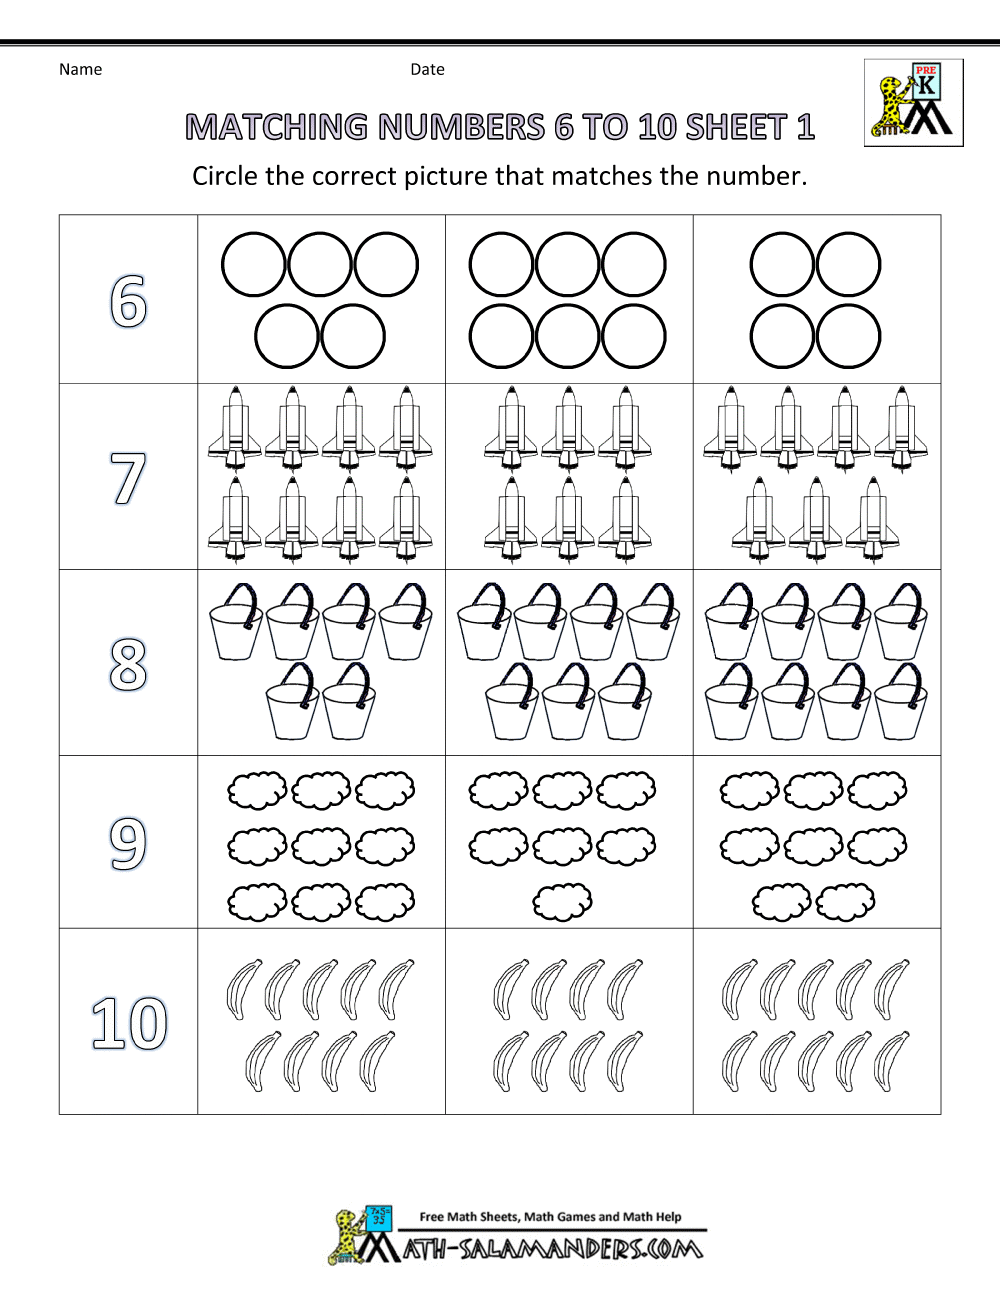 Worksheets matching numbers 1 10 24 Number